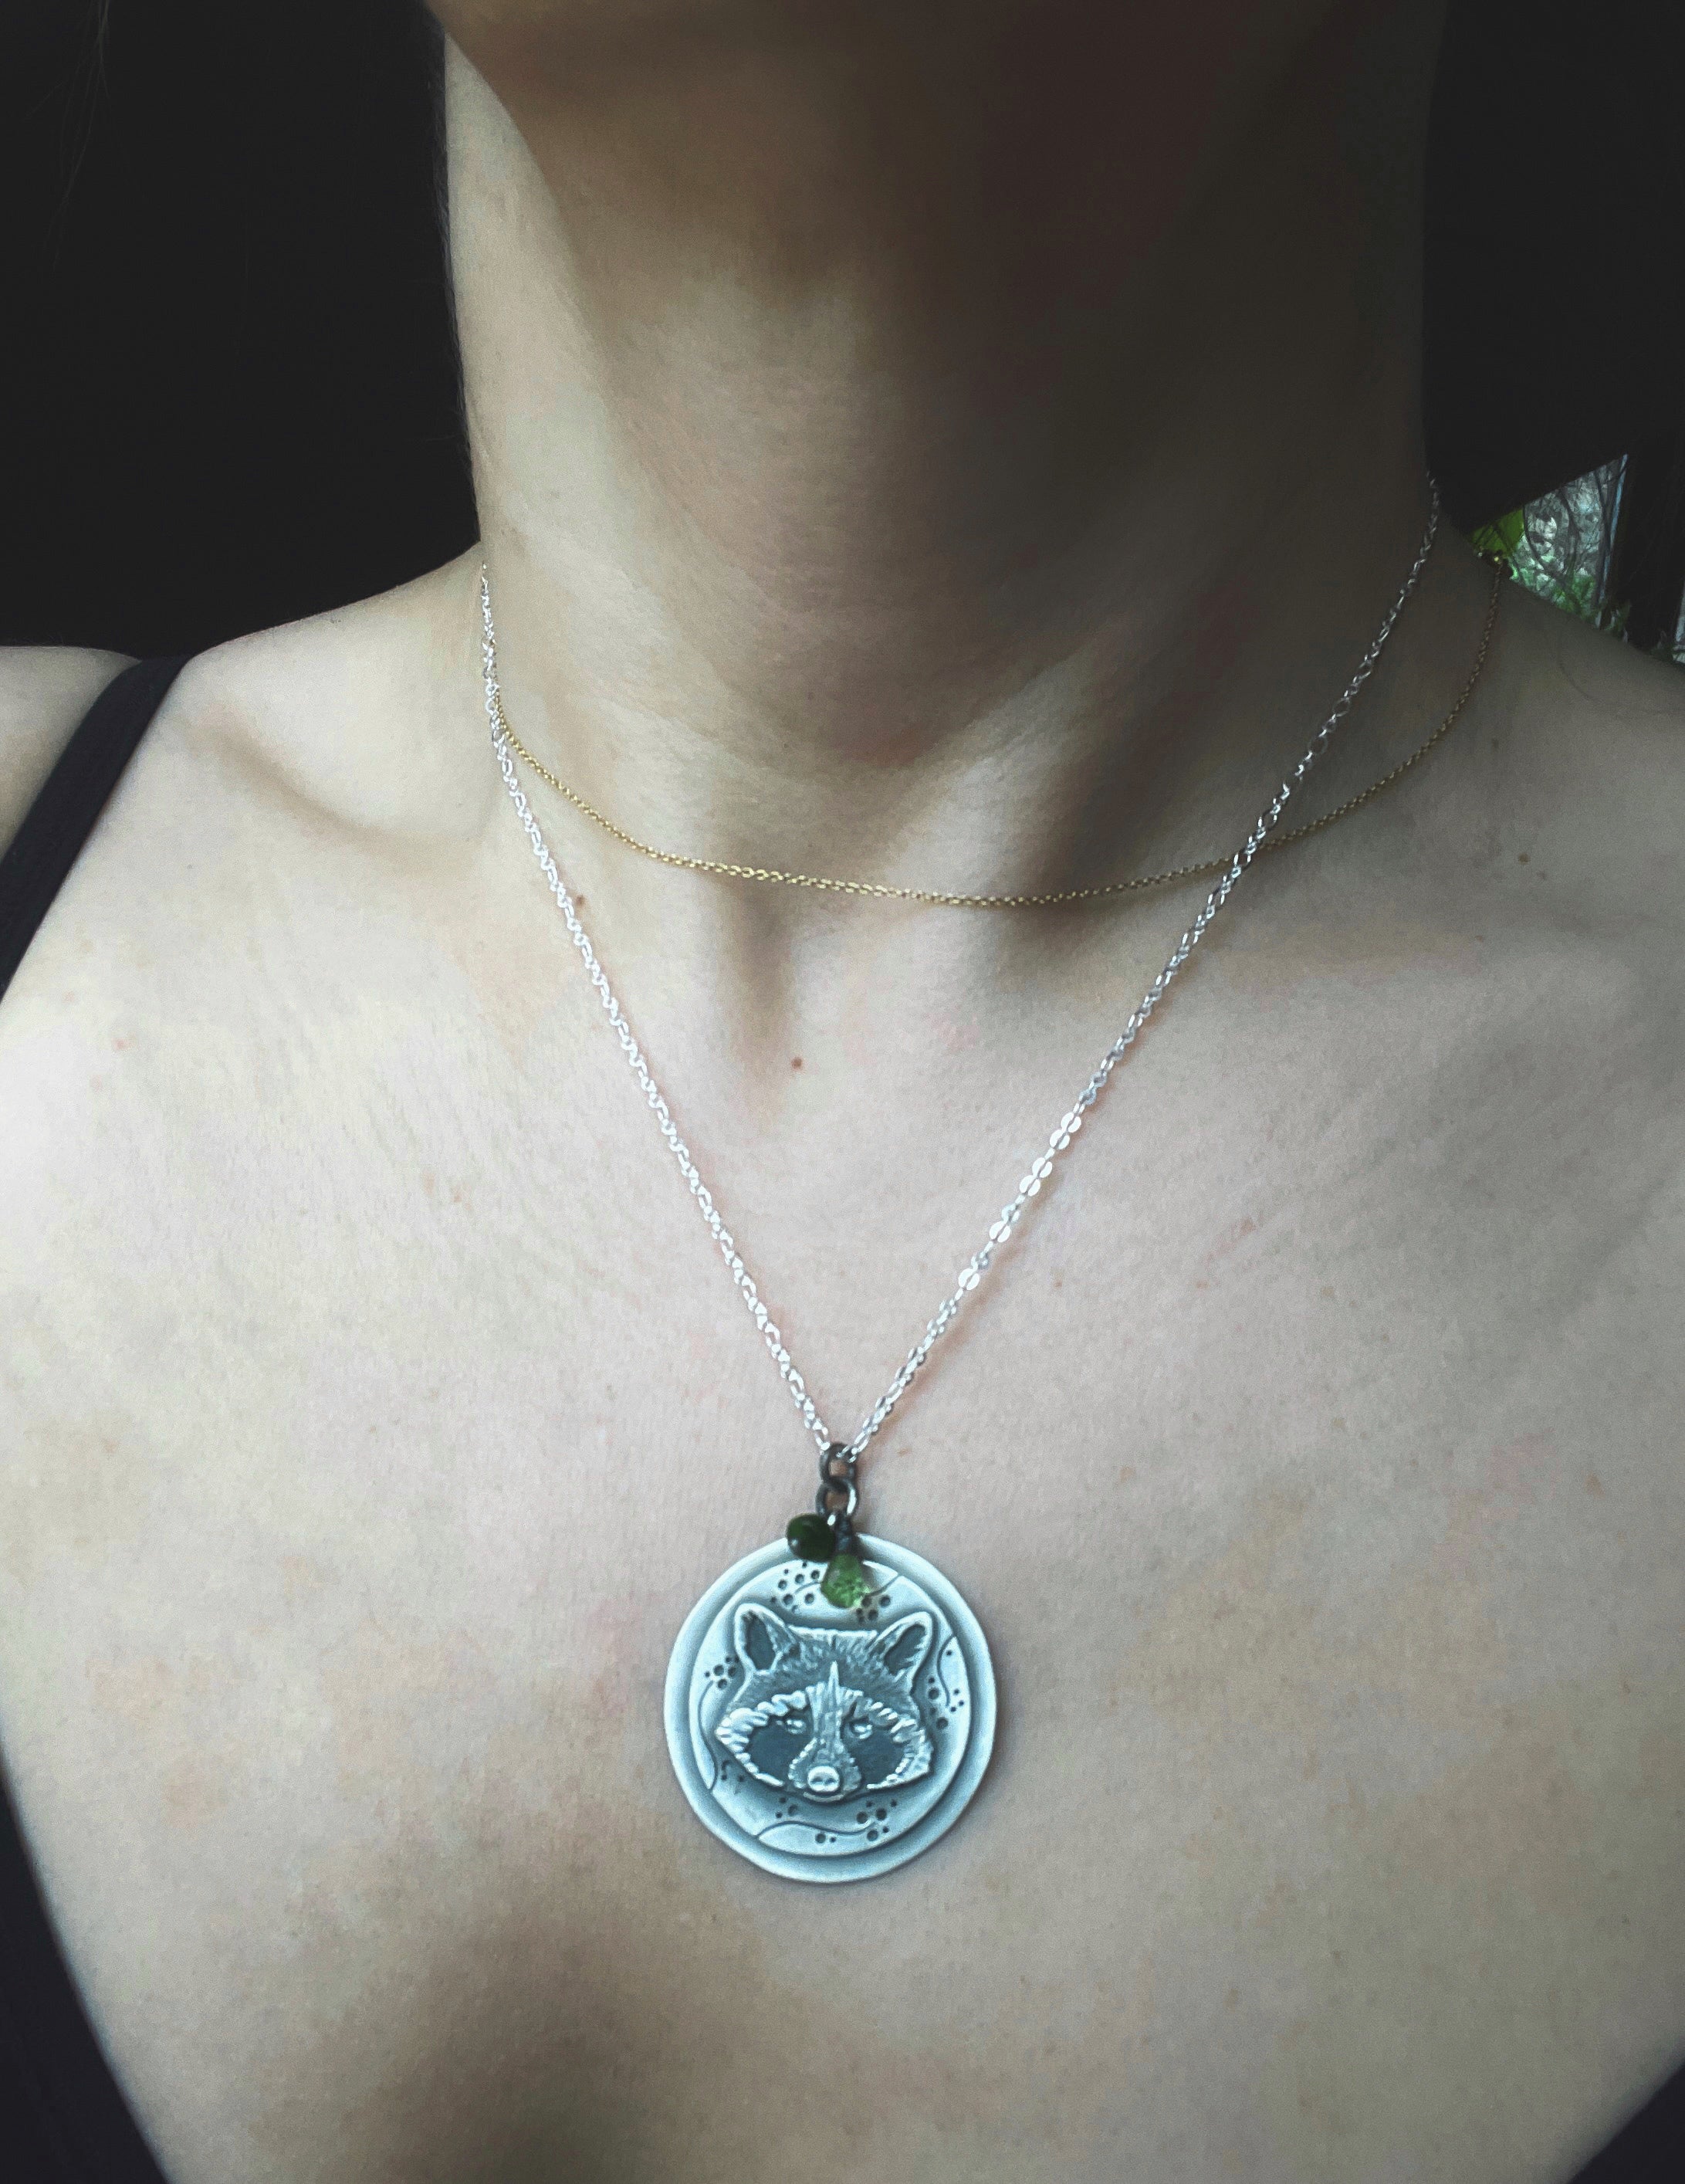 The Badger Totem Necklace